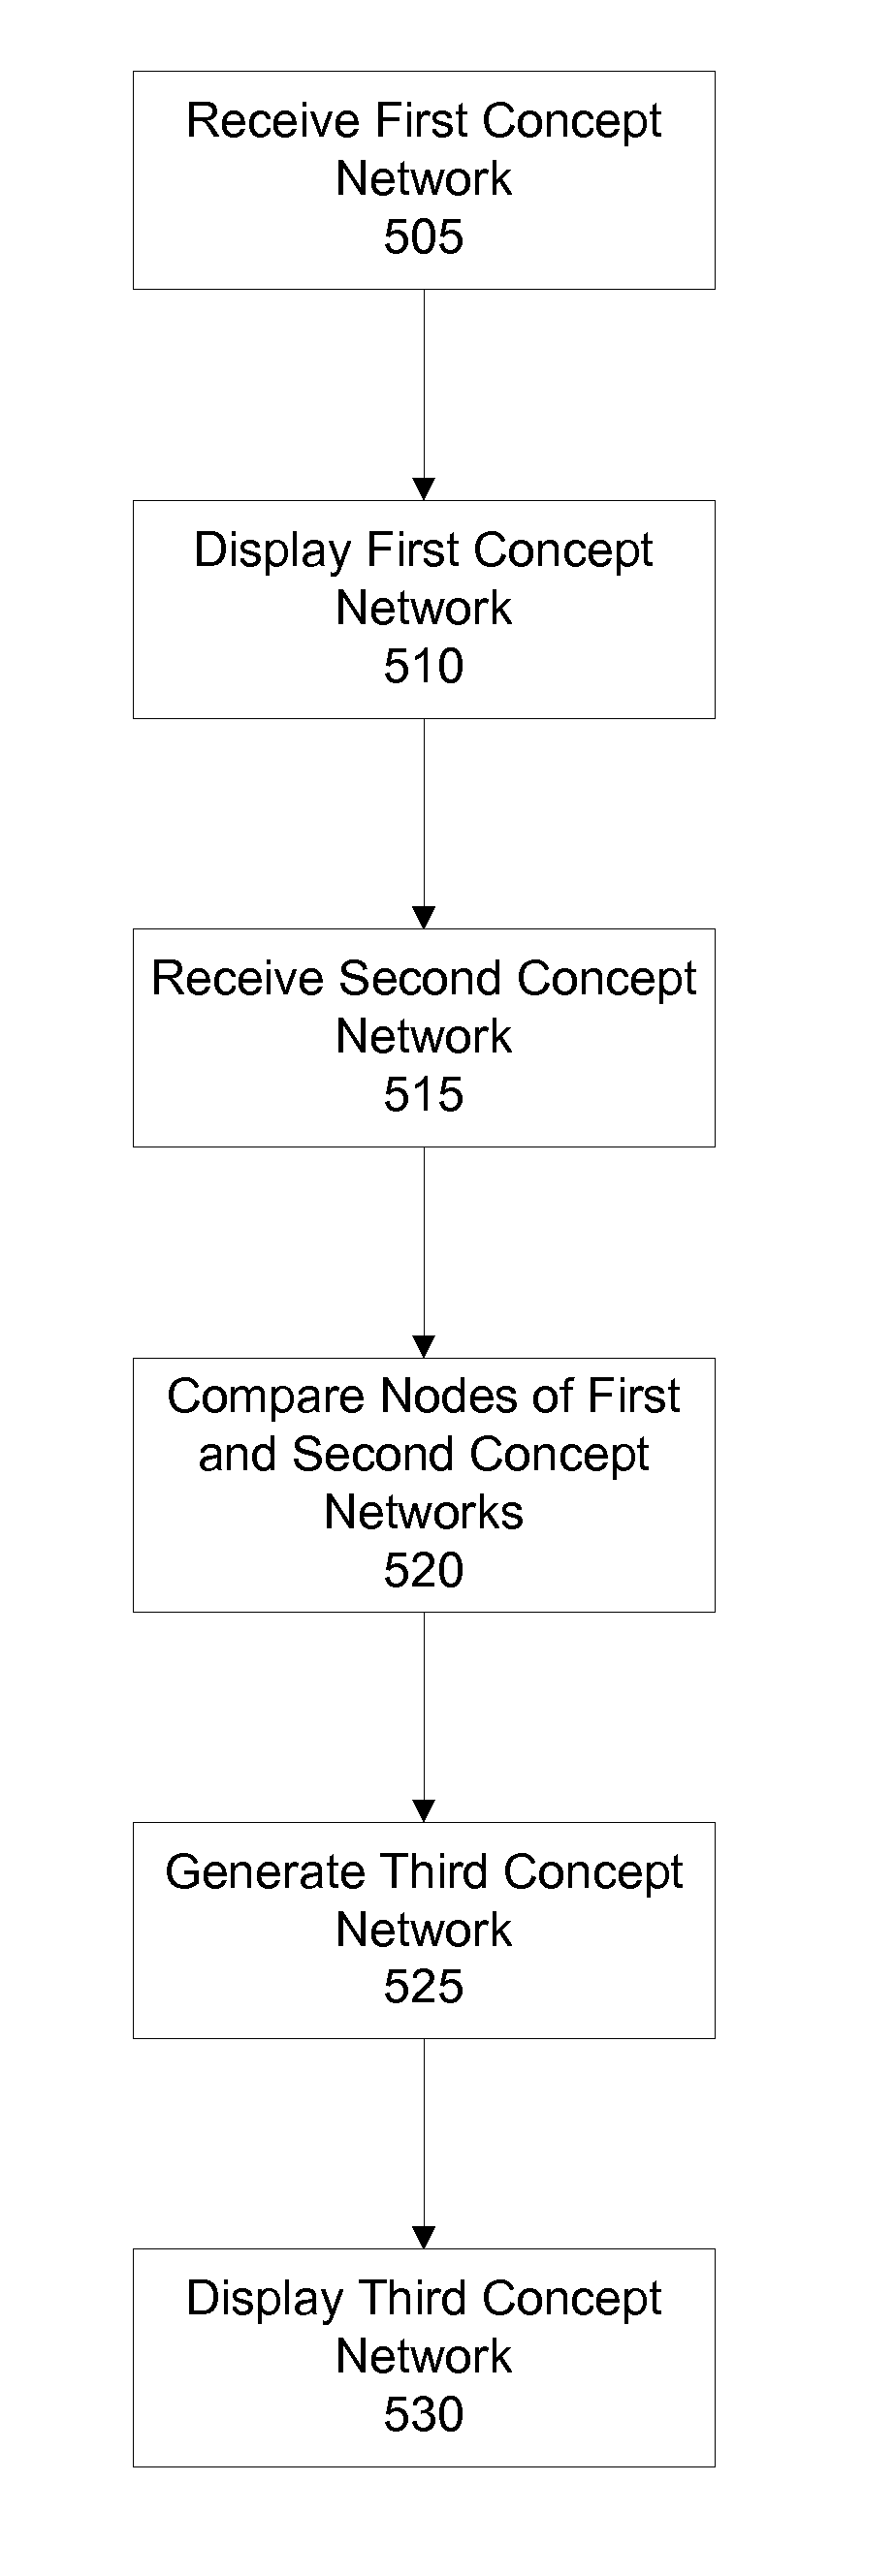 System, Method, and Computer Program Product for Concept Network Based Collaboration